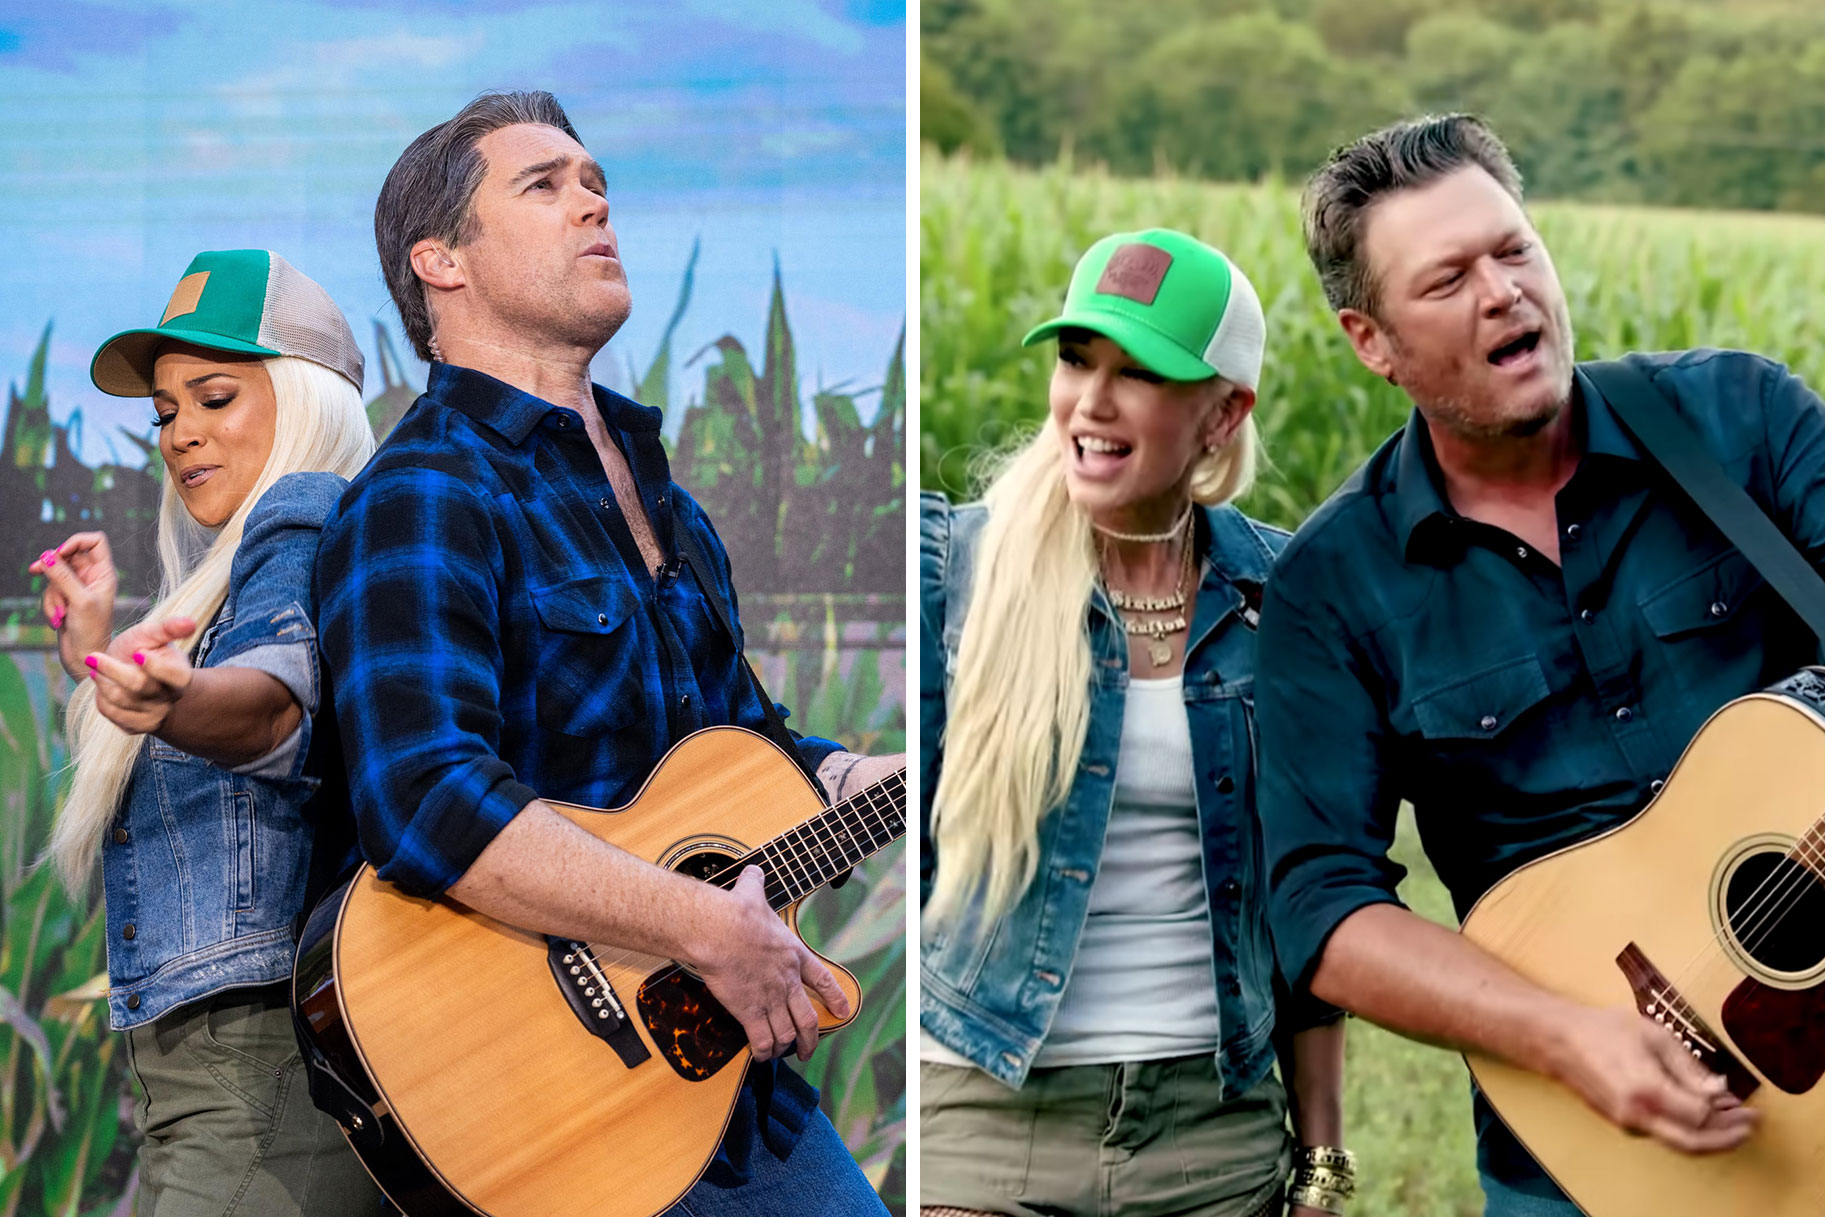 Blake Shelton Had the Best Reaction to the TODAY Anchors' Gwen & Blake Costumes